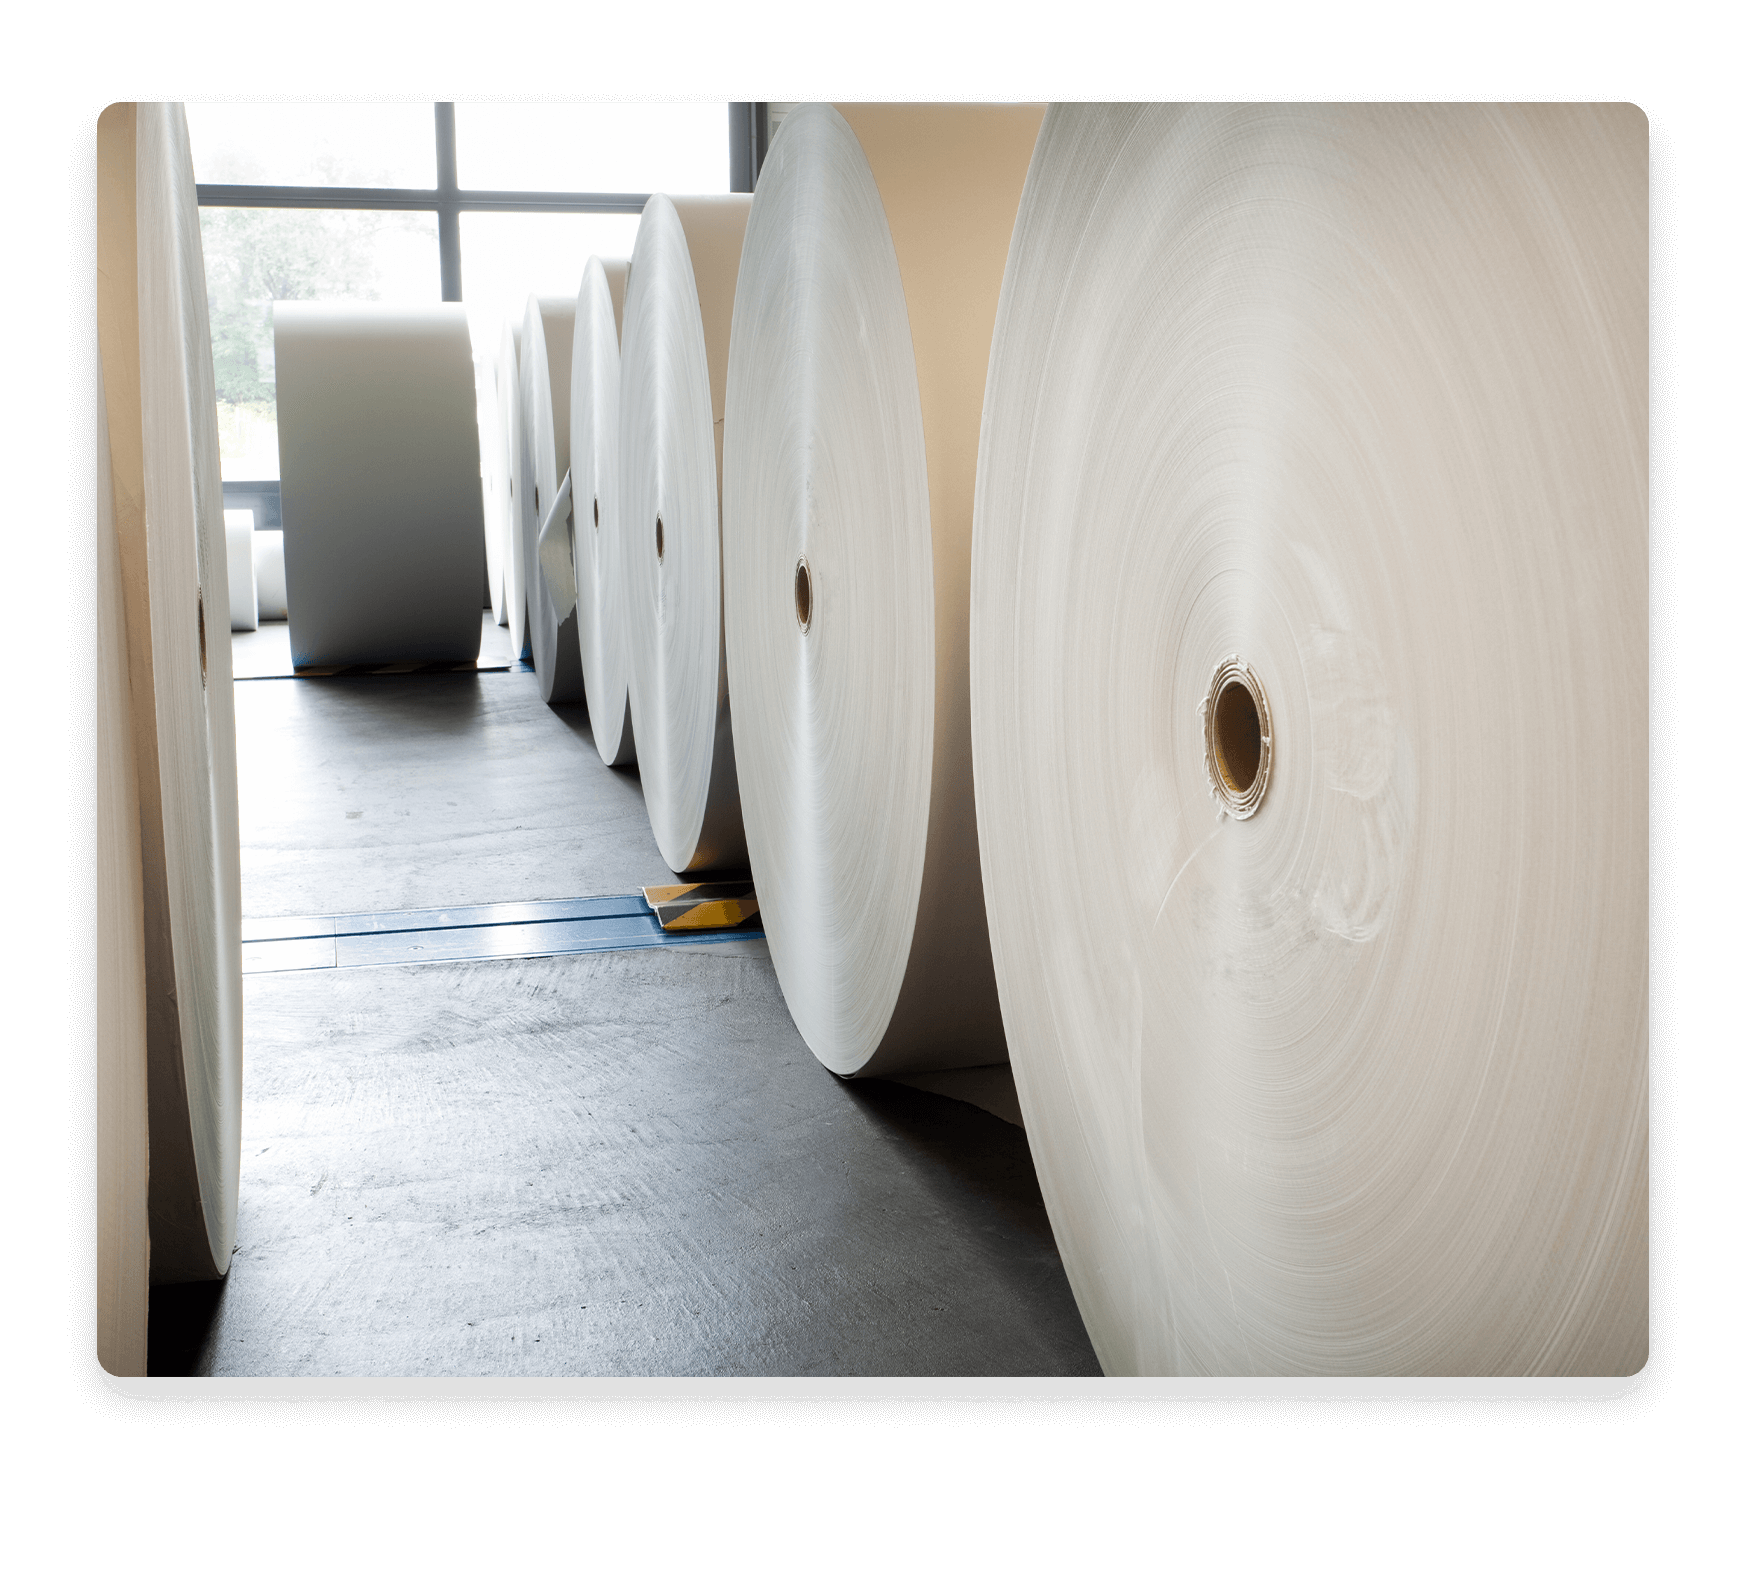 Large rolls of paper in a warehouse.